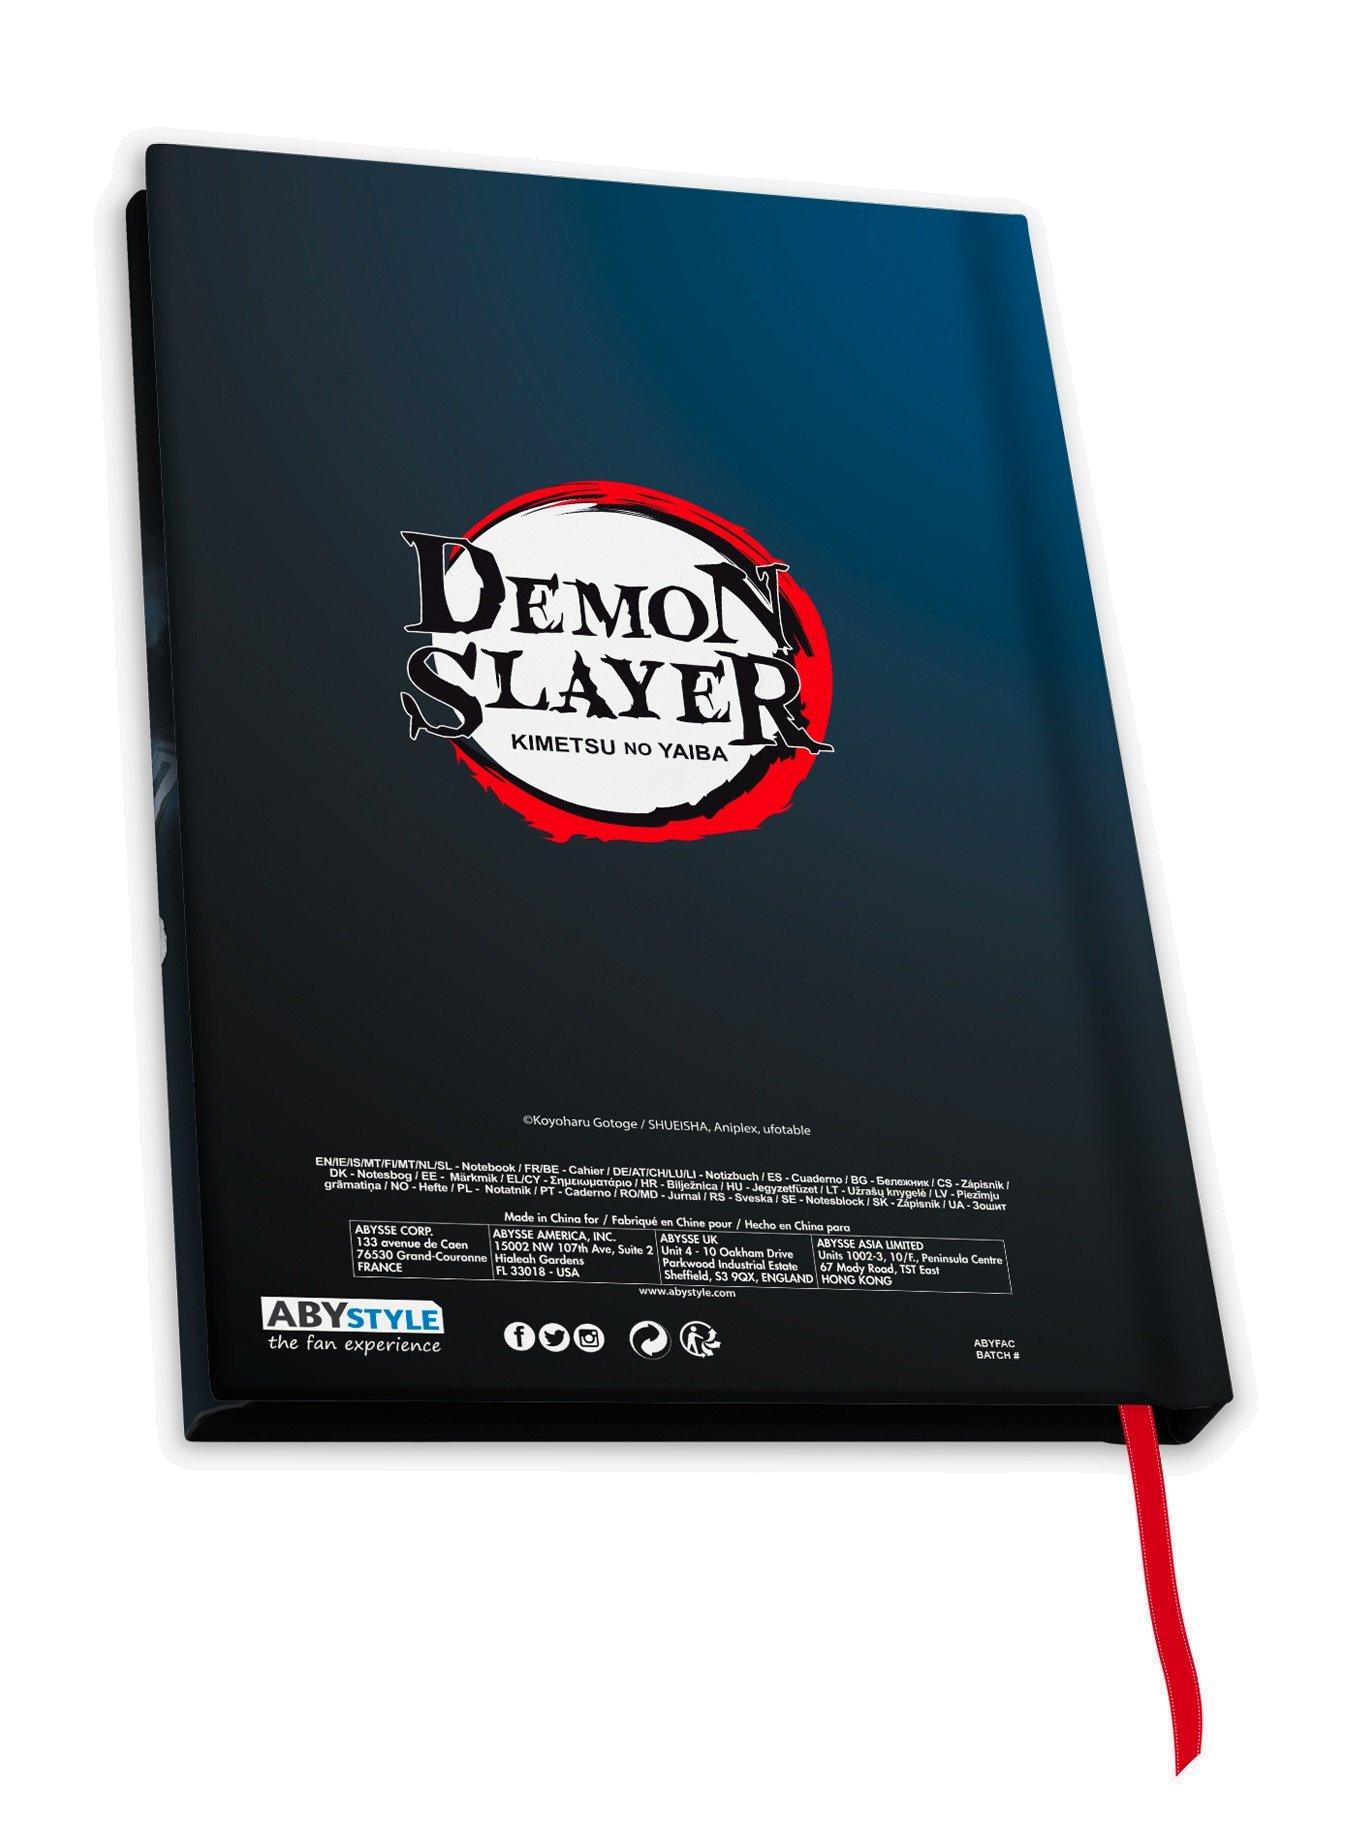 Demon Slayer( for display only case Gamestop Nintendo switch ( NO GAME)